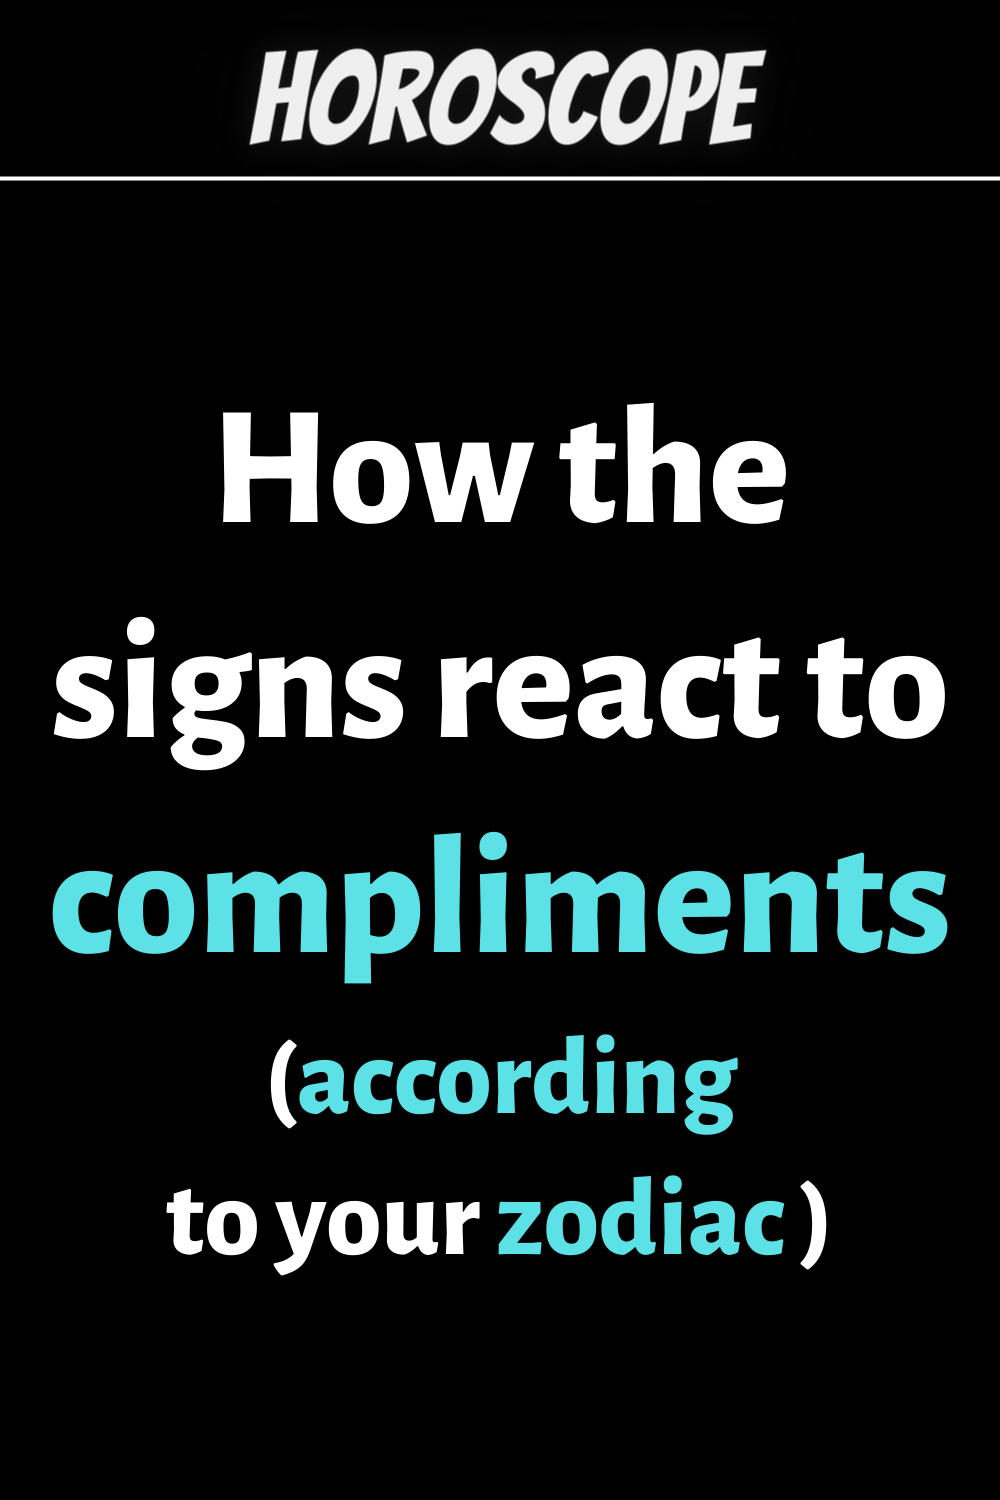 How the zodiac signs react to compliments